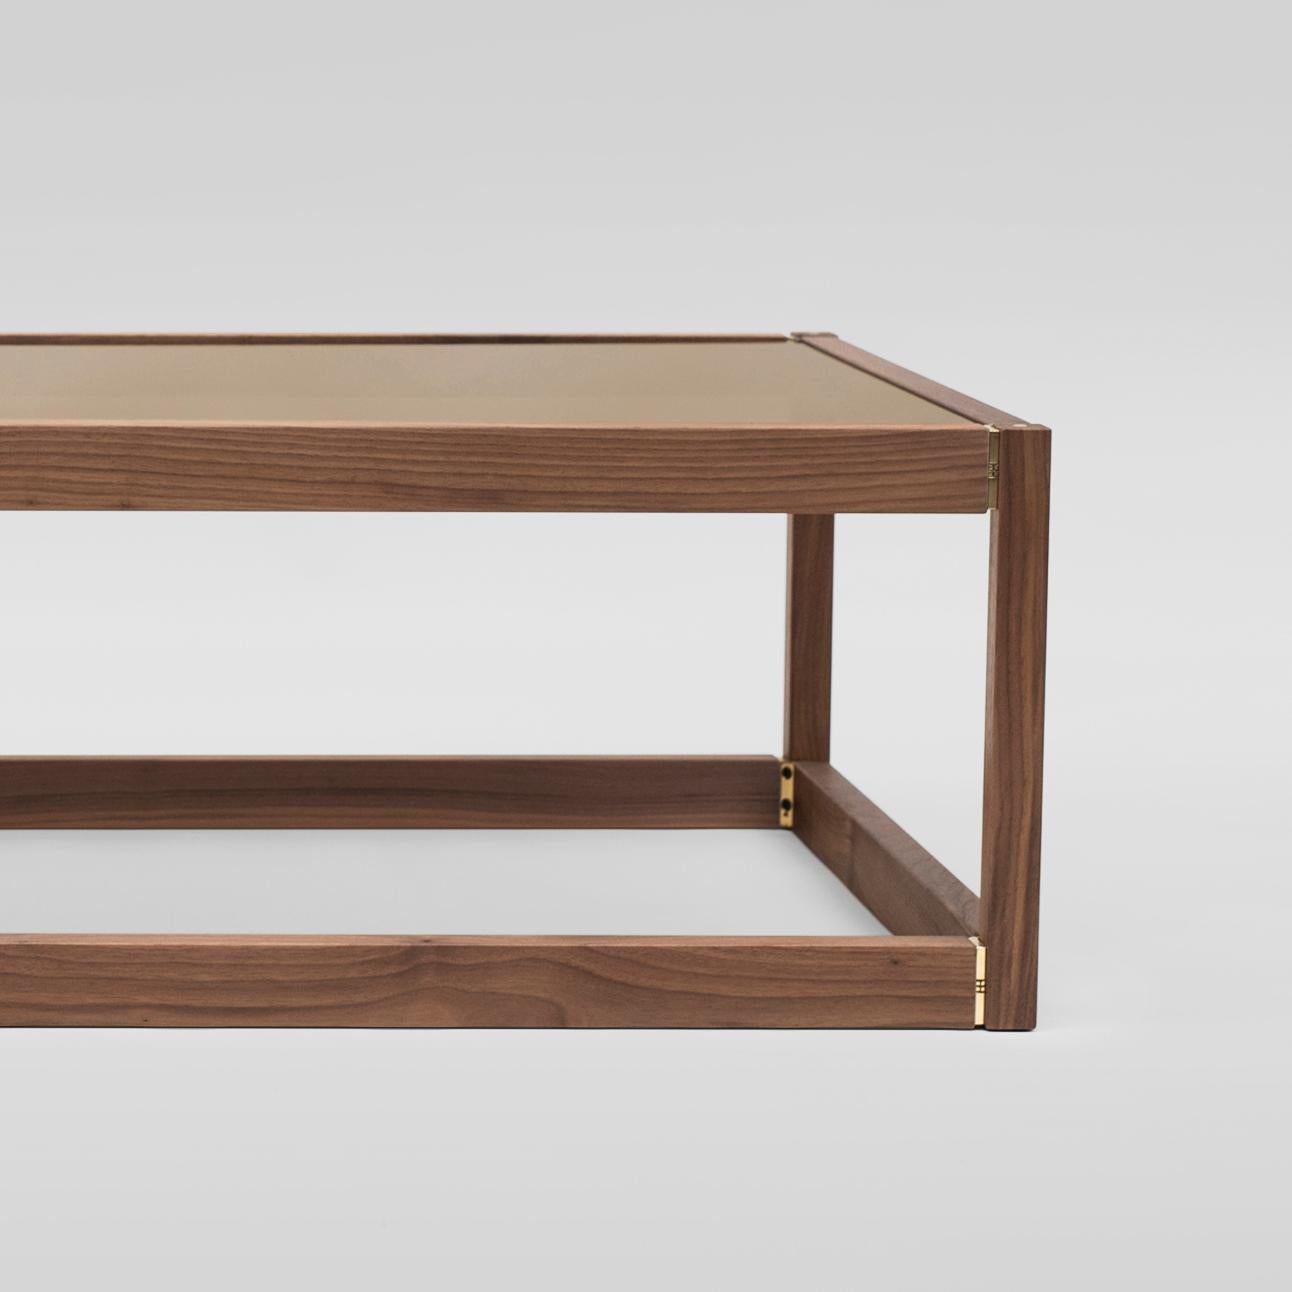 Contemporary coffee table designed by Peter Ghyczy.
Manufactured by Ghyczy, (Netherlands)

This furniture tells an intriguing dialogue between history and modernity. The joints are an evolution of a design by Peter Ghyczy from begin of the 1970s.